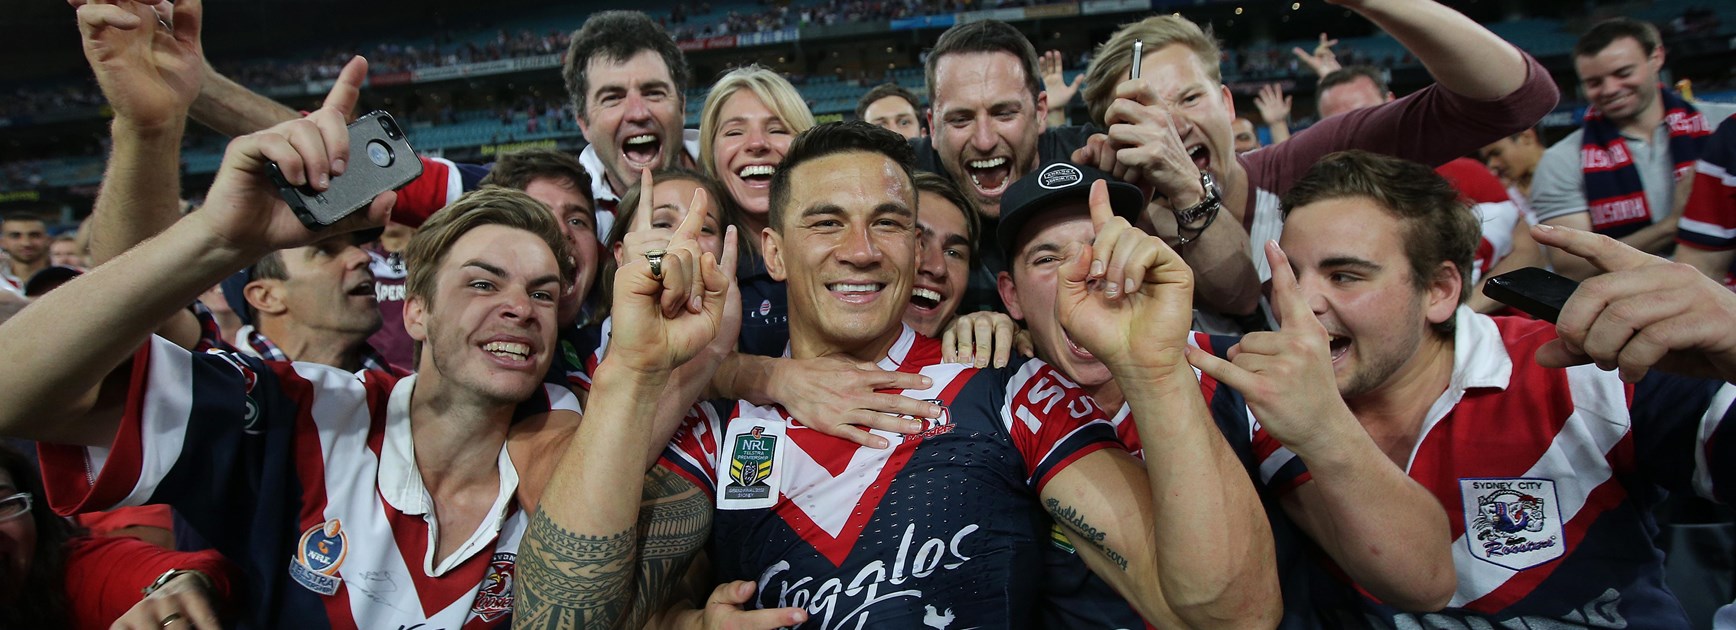 Roosters reunion: Cordner would welcome SBW back 'with open arms'